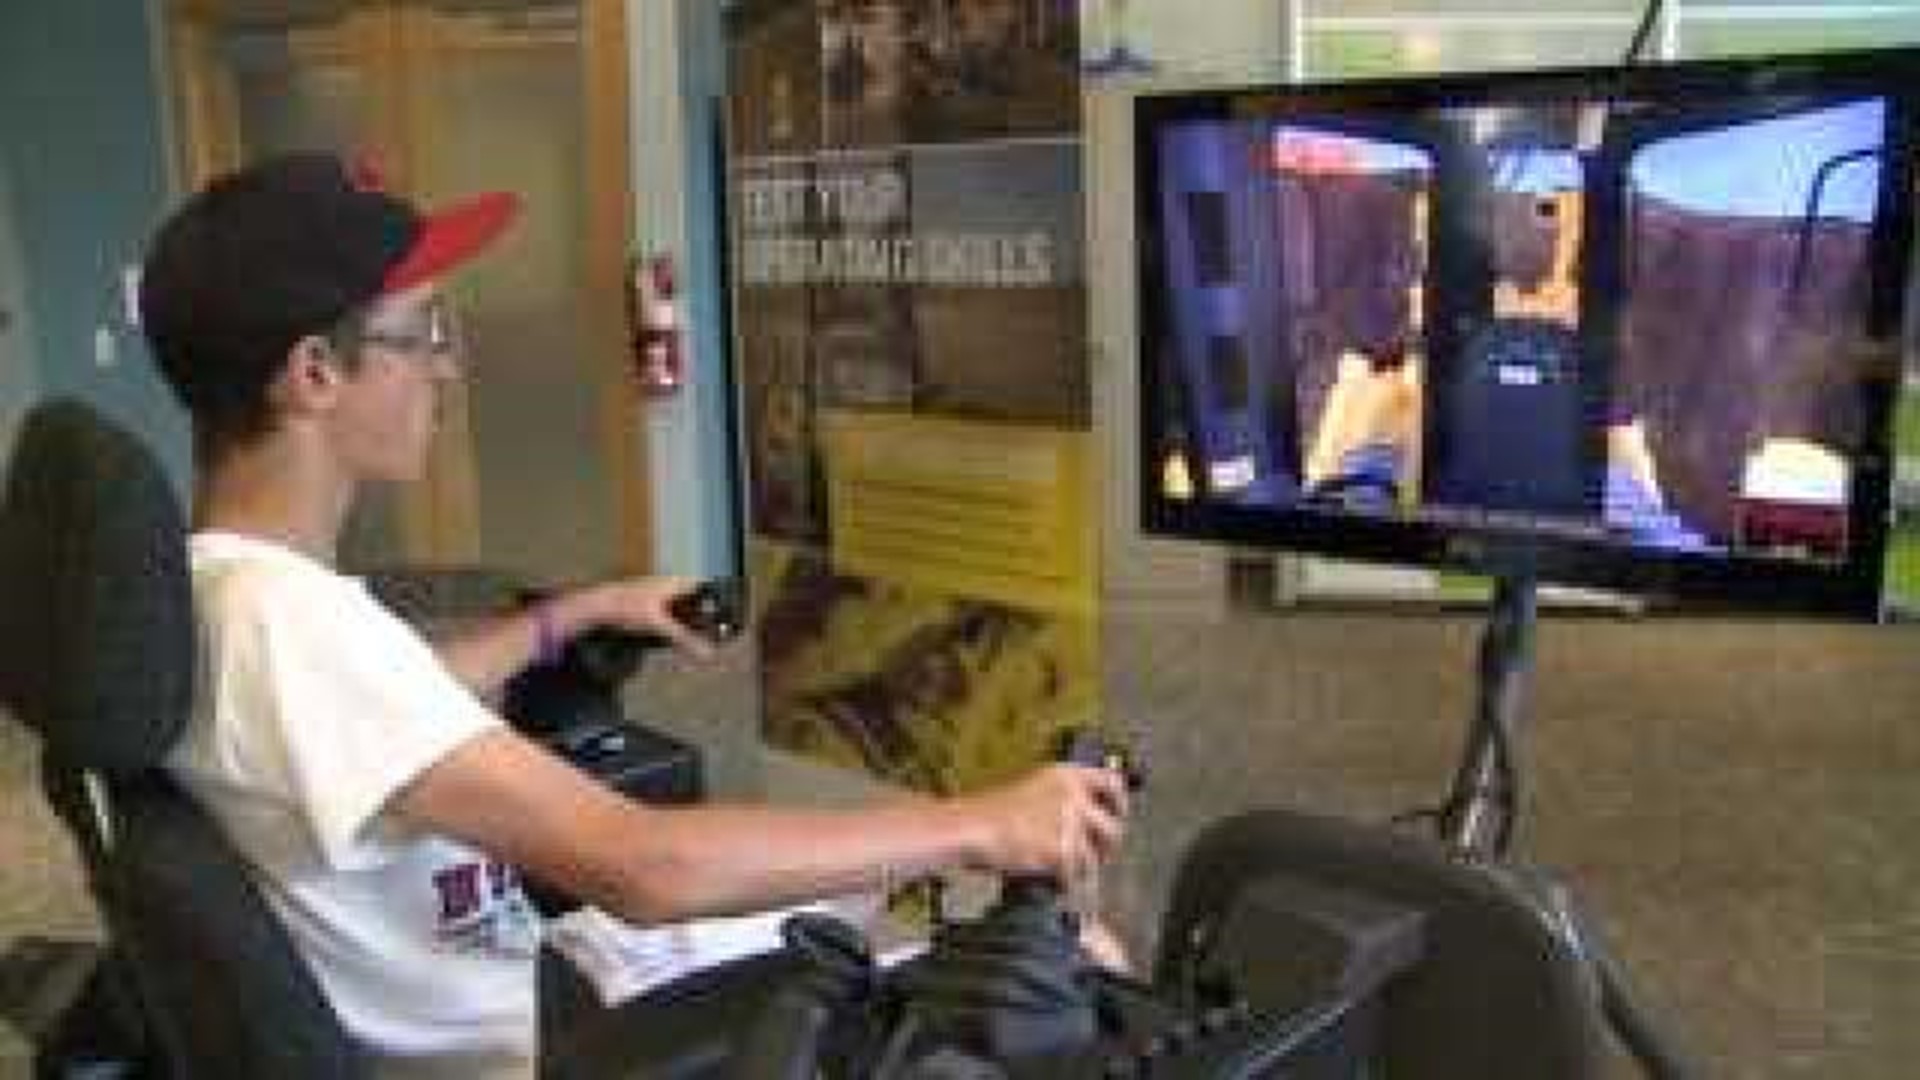 Bulldozer simulator gives kids hands-on experience